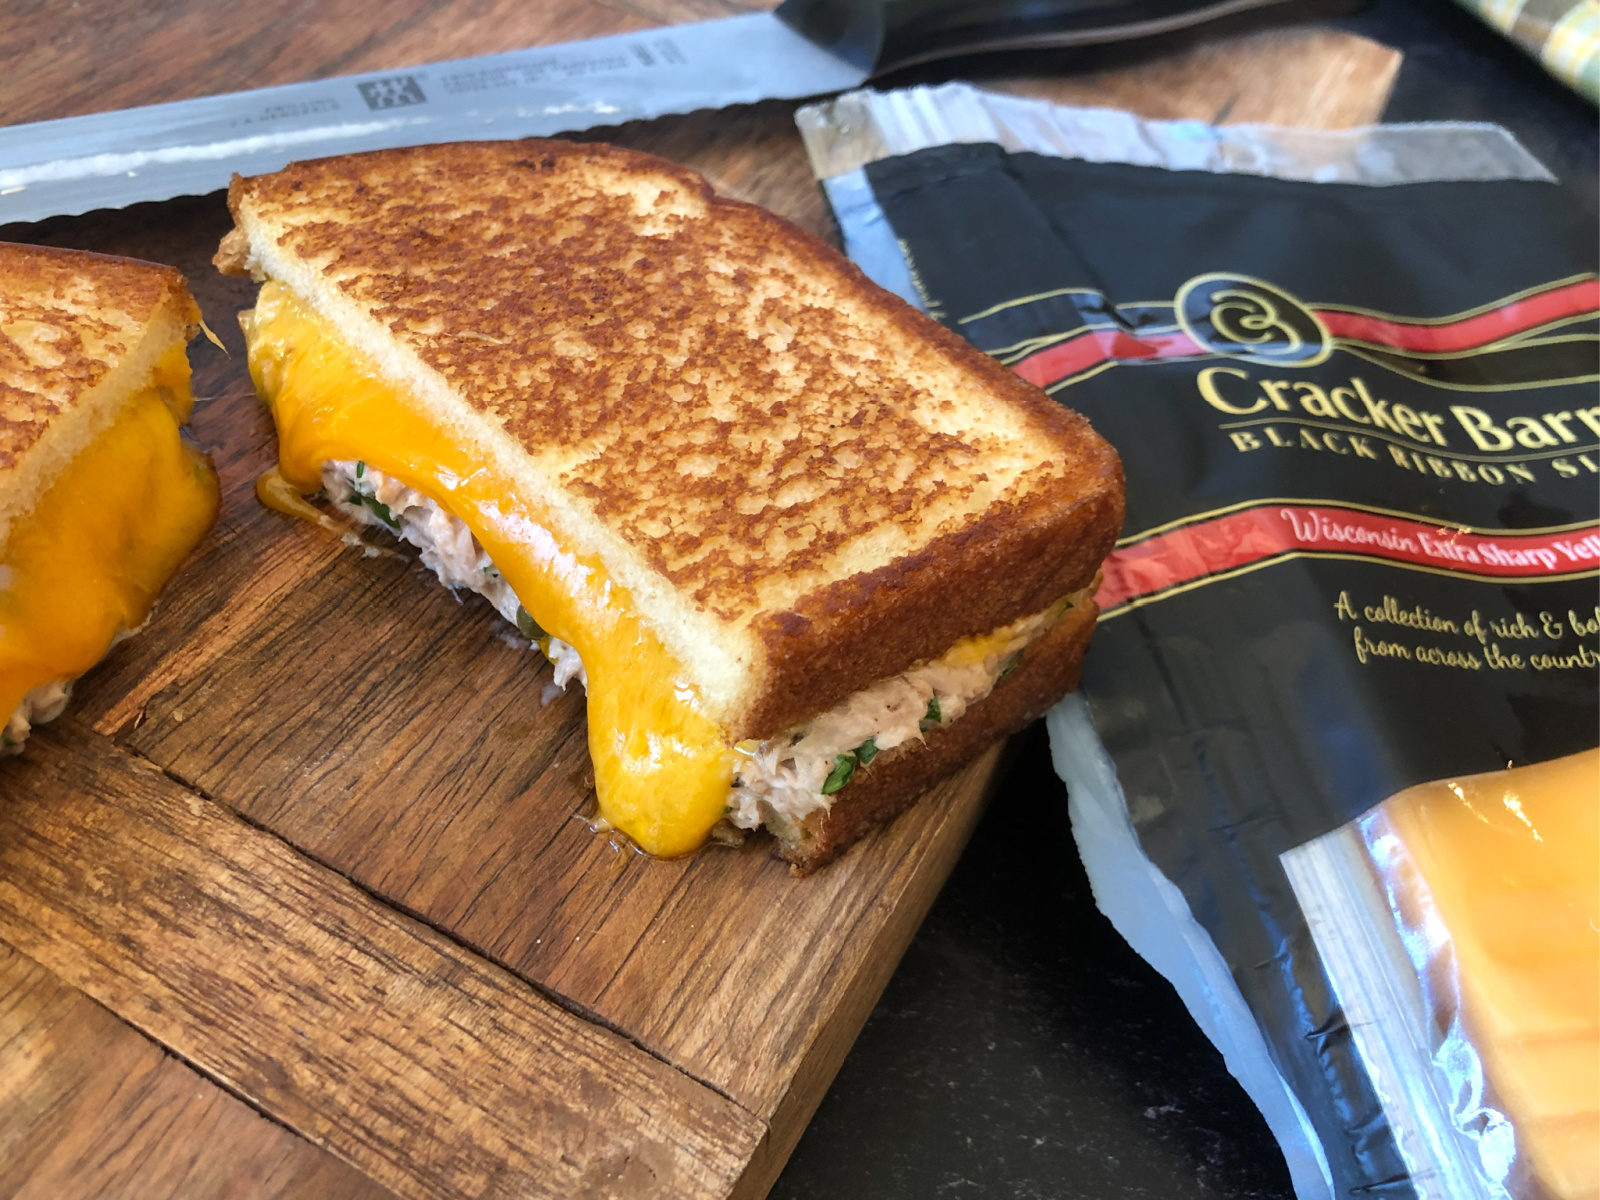 Super Deal On Delicious Cracker Barrel Cheese - On Sale 2/$6 This Week At Publix on I Heart Publix